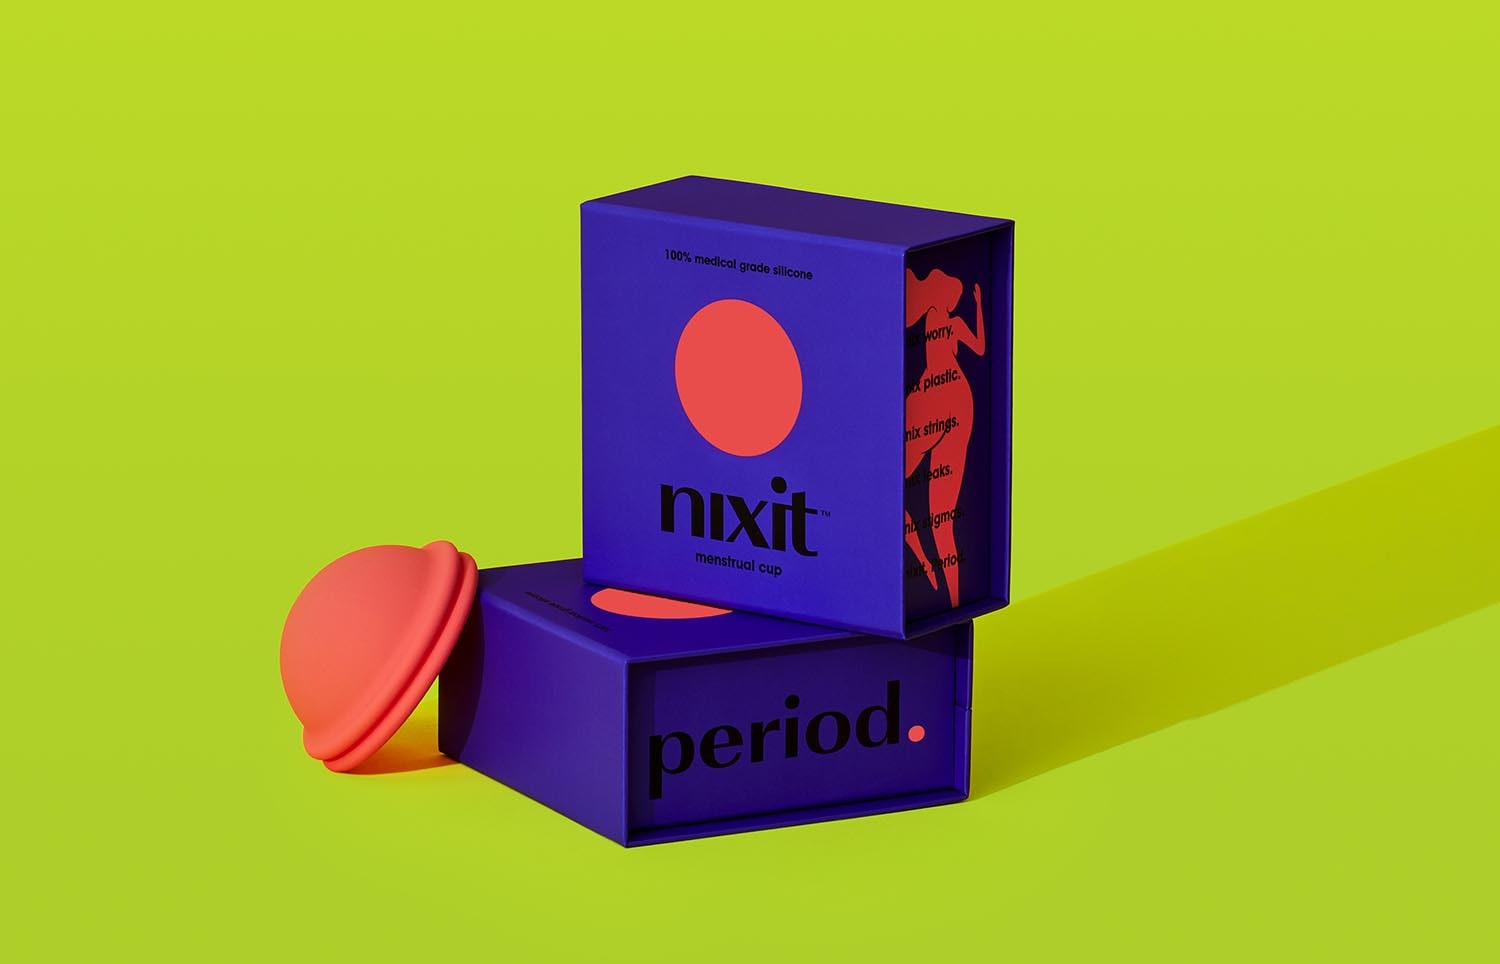 Nixit Menstrual Cup Cleanser & Vaginal Wash – The Good Planet Company